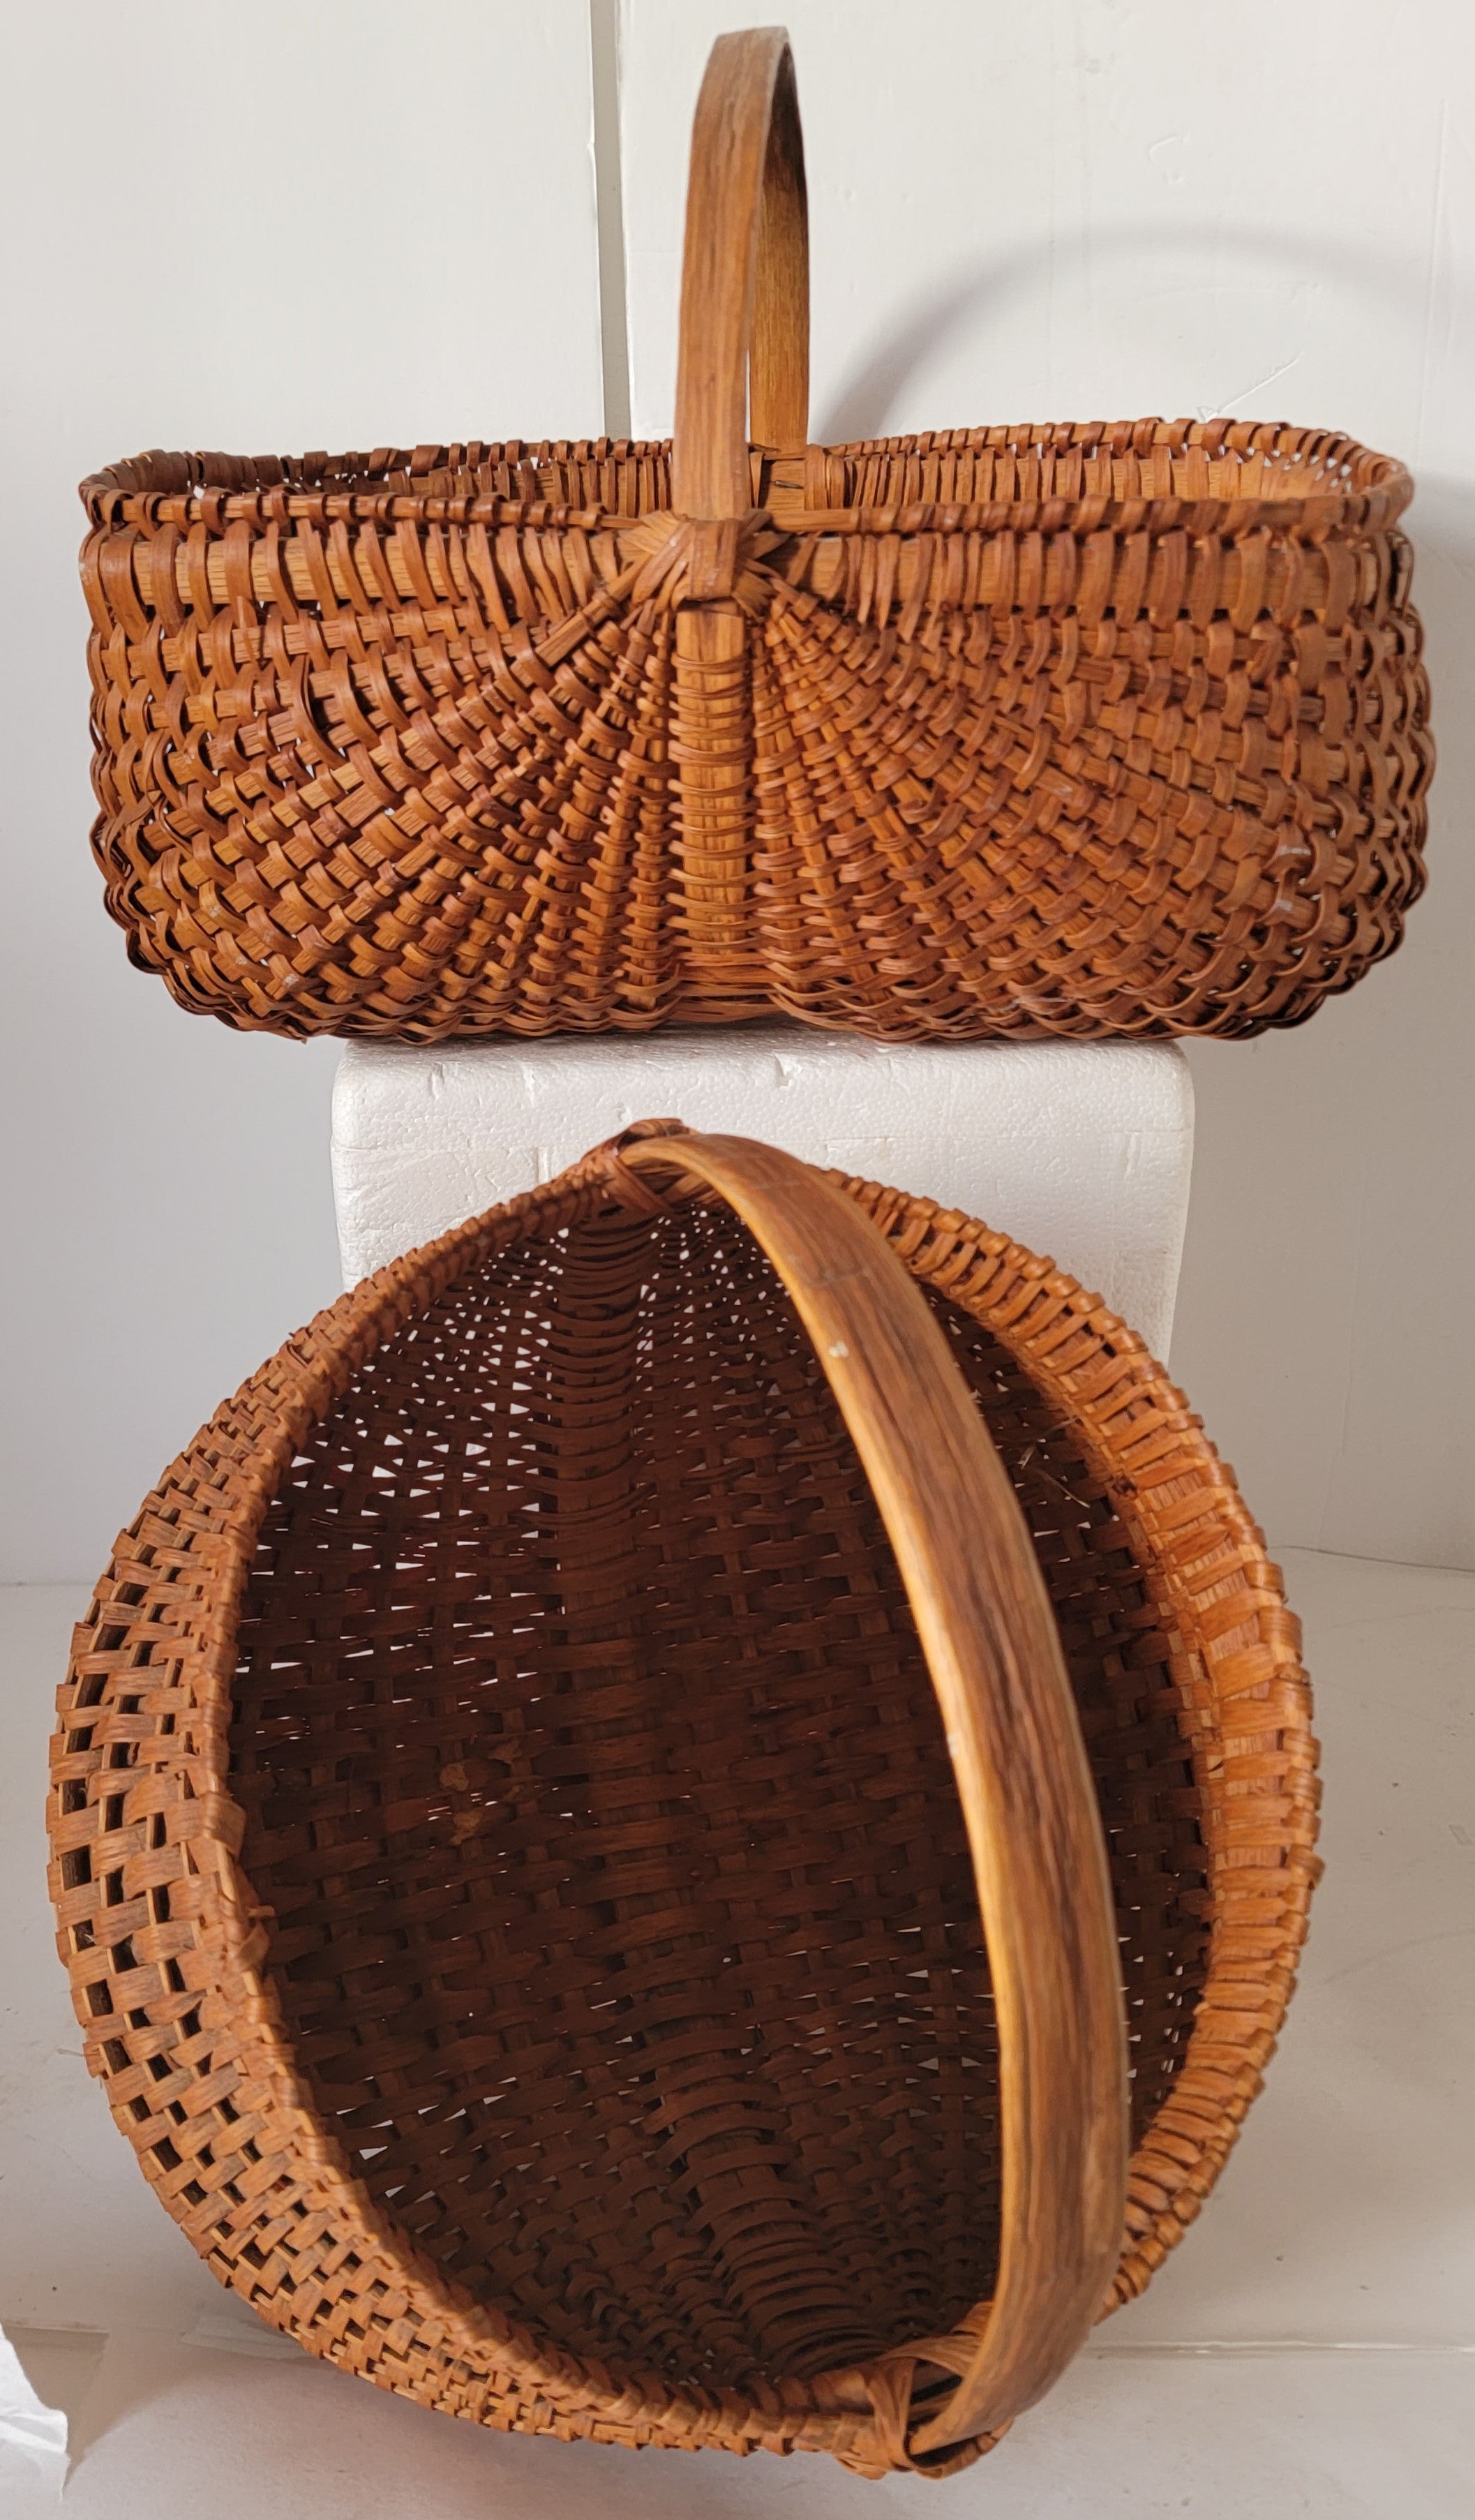 19th C buttock baskets from Pennsylvania - pair rounded square basket measures -12.5 x 16 x 11.5
Smaller buttocks basket measures - 14 x 13 x 12.